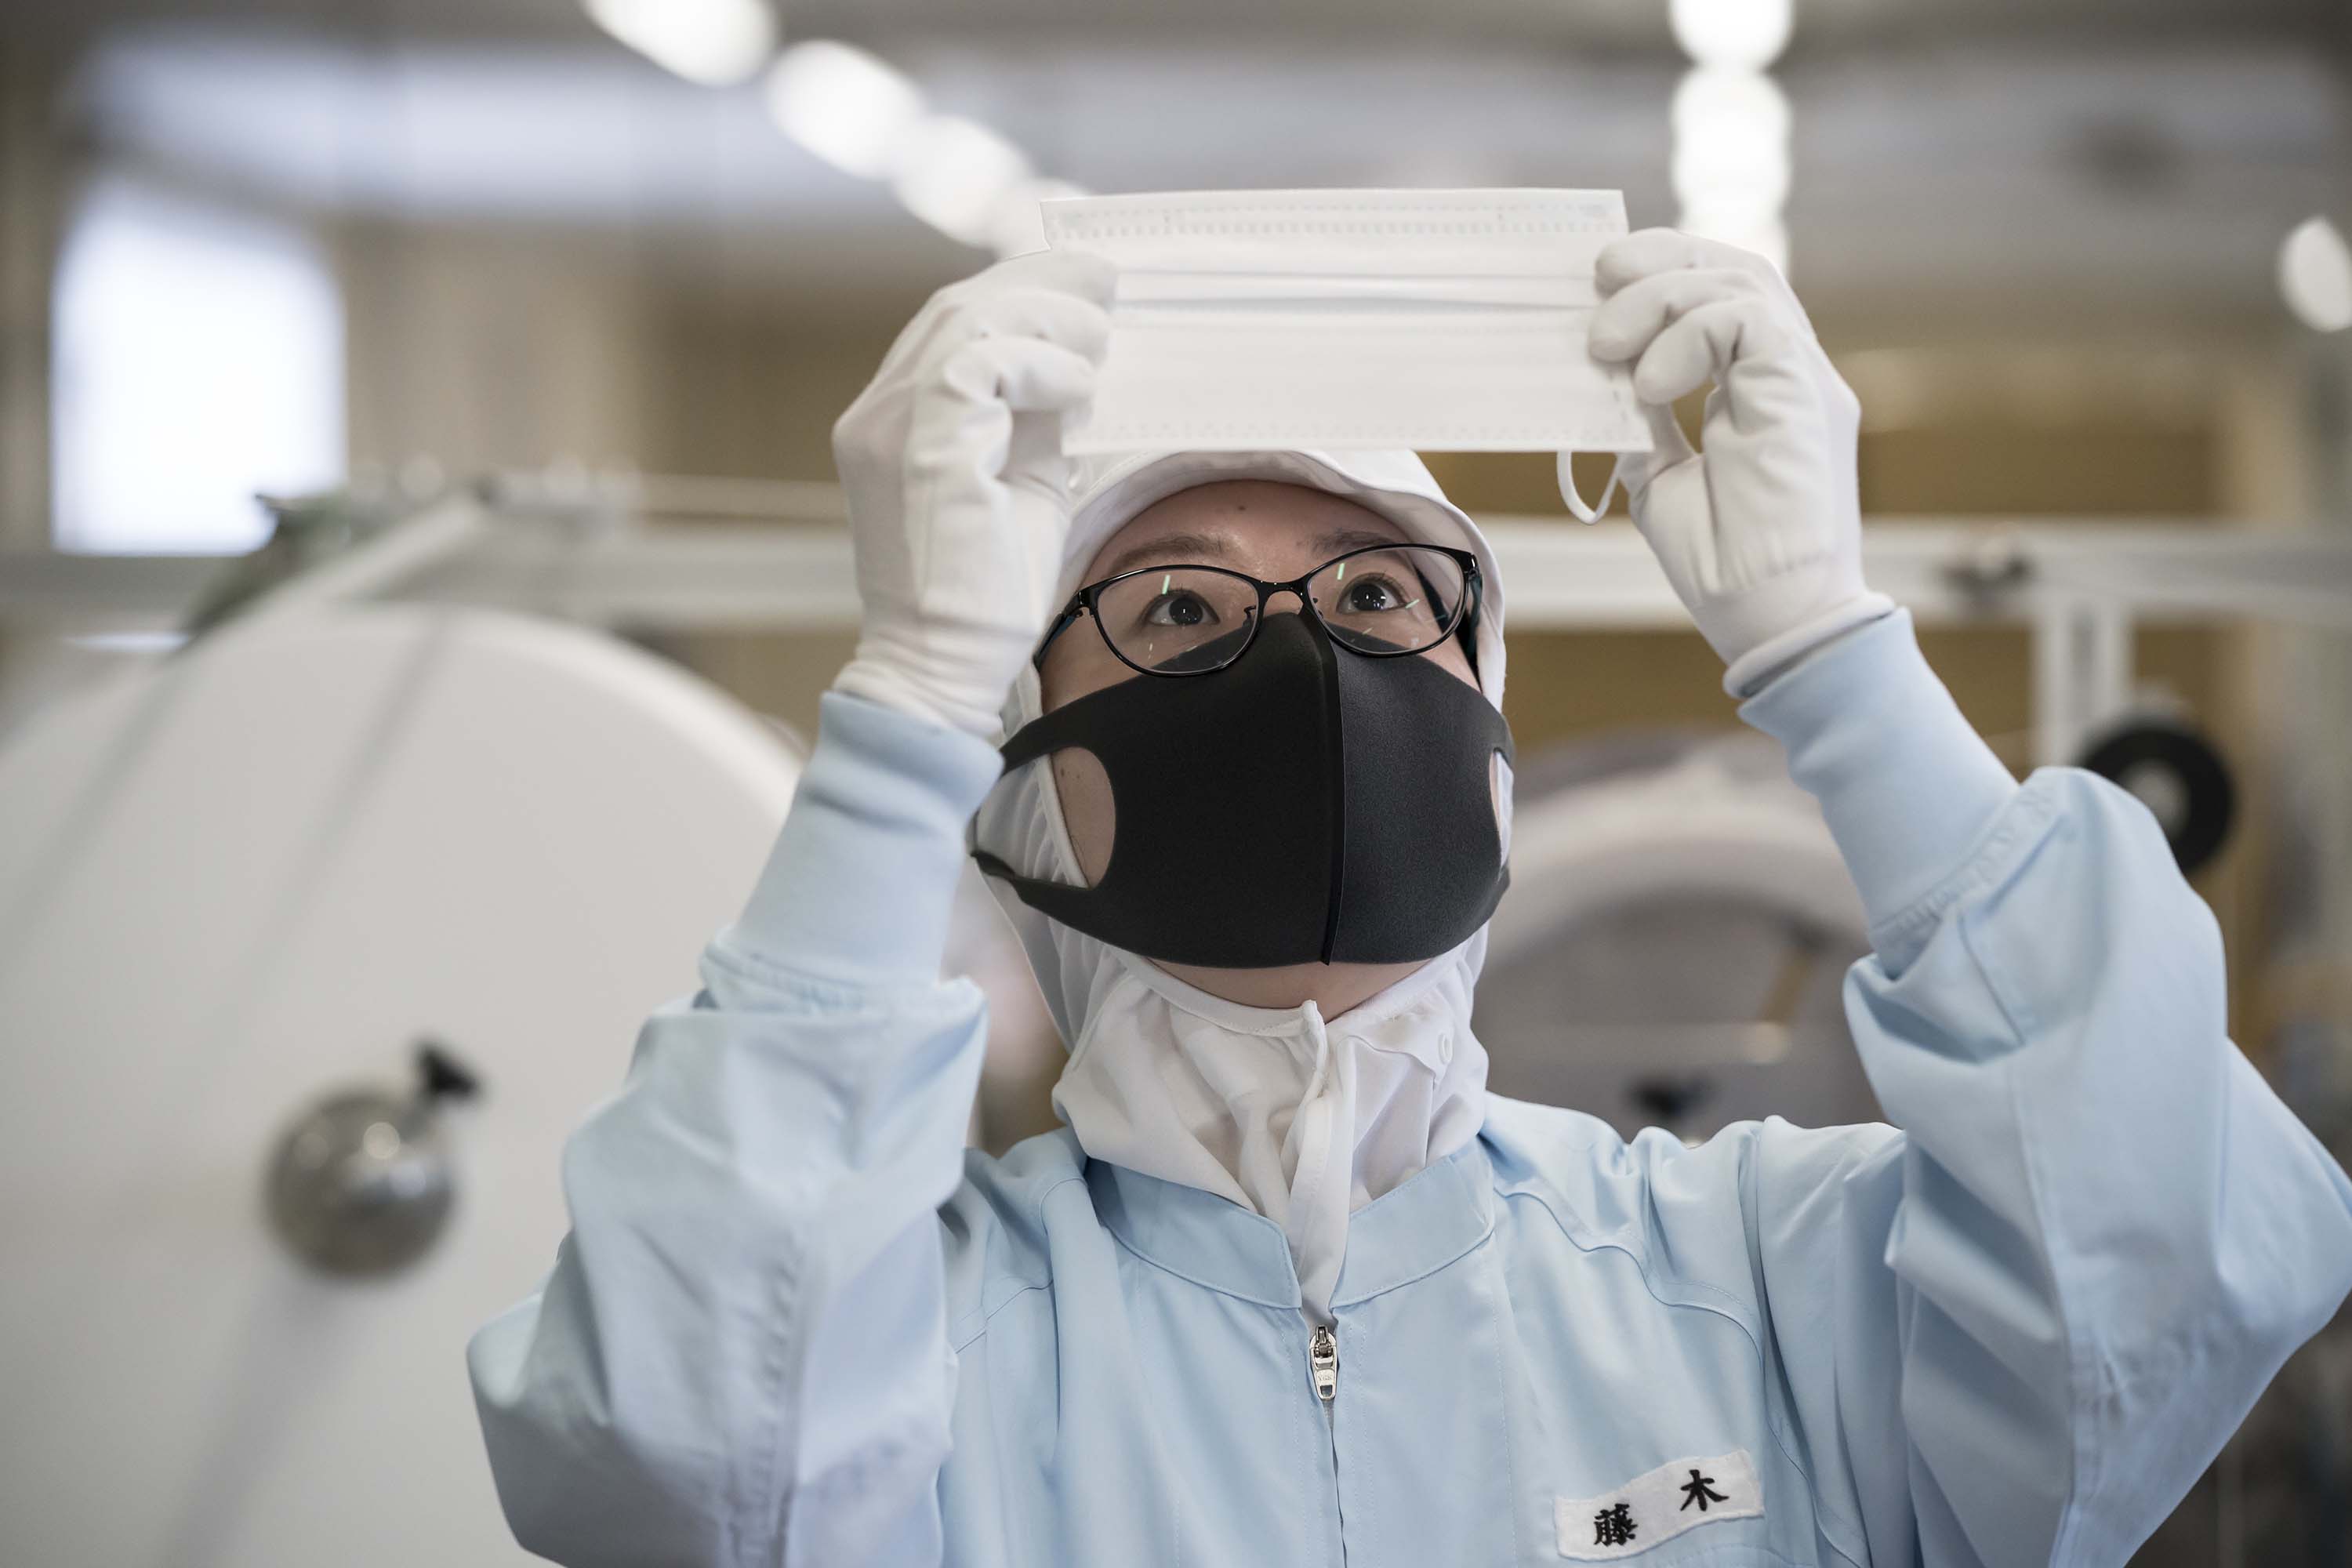 An employee inspects a disposable face mask at a factory in Nagoya, Japan on Thursday.